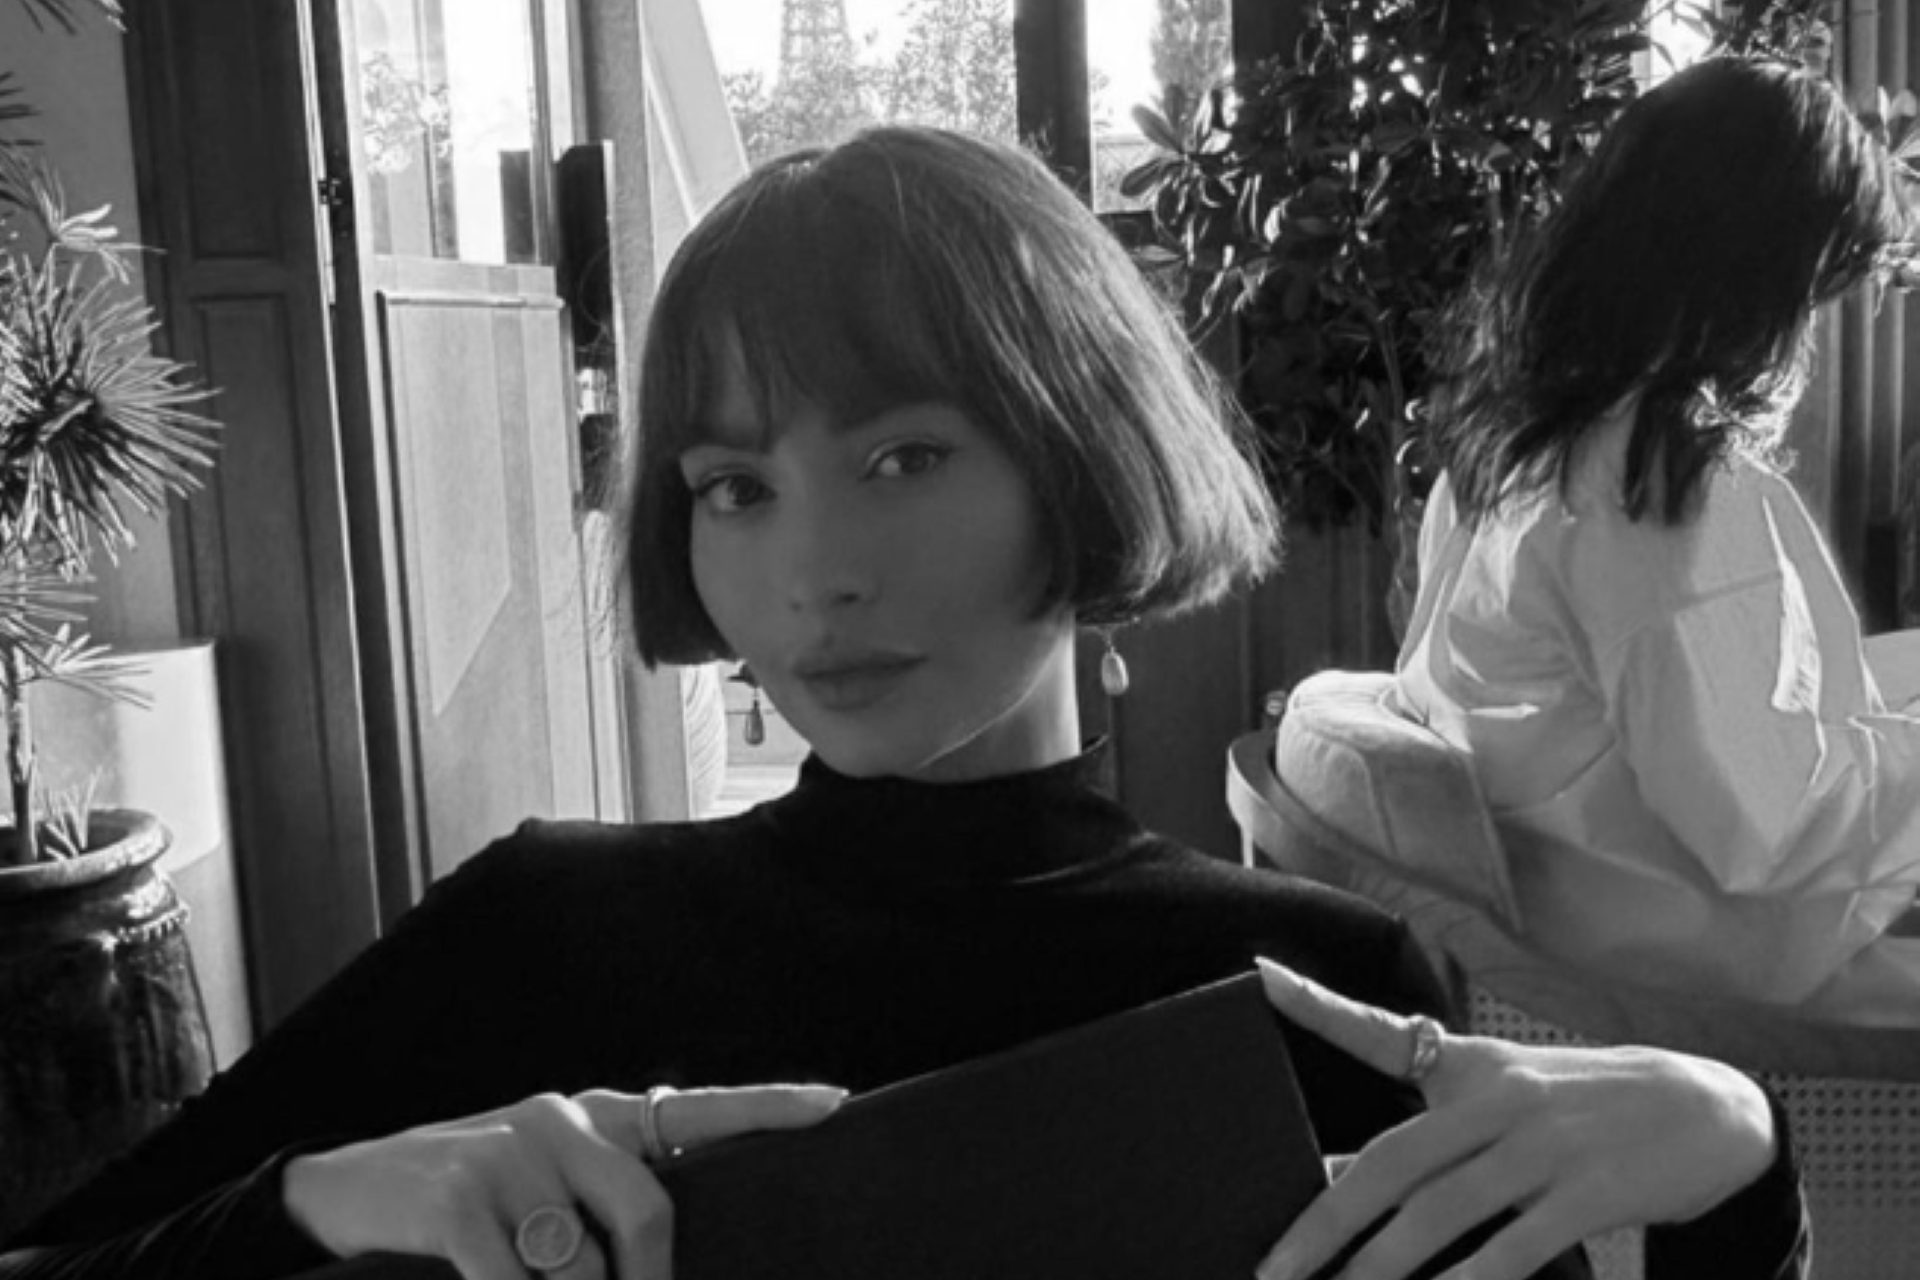 Forever chic with the French bob